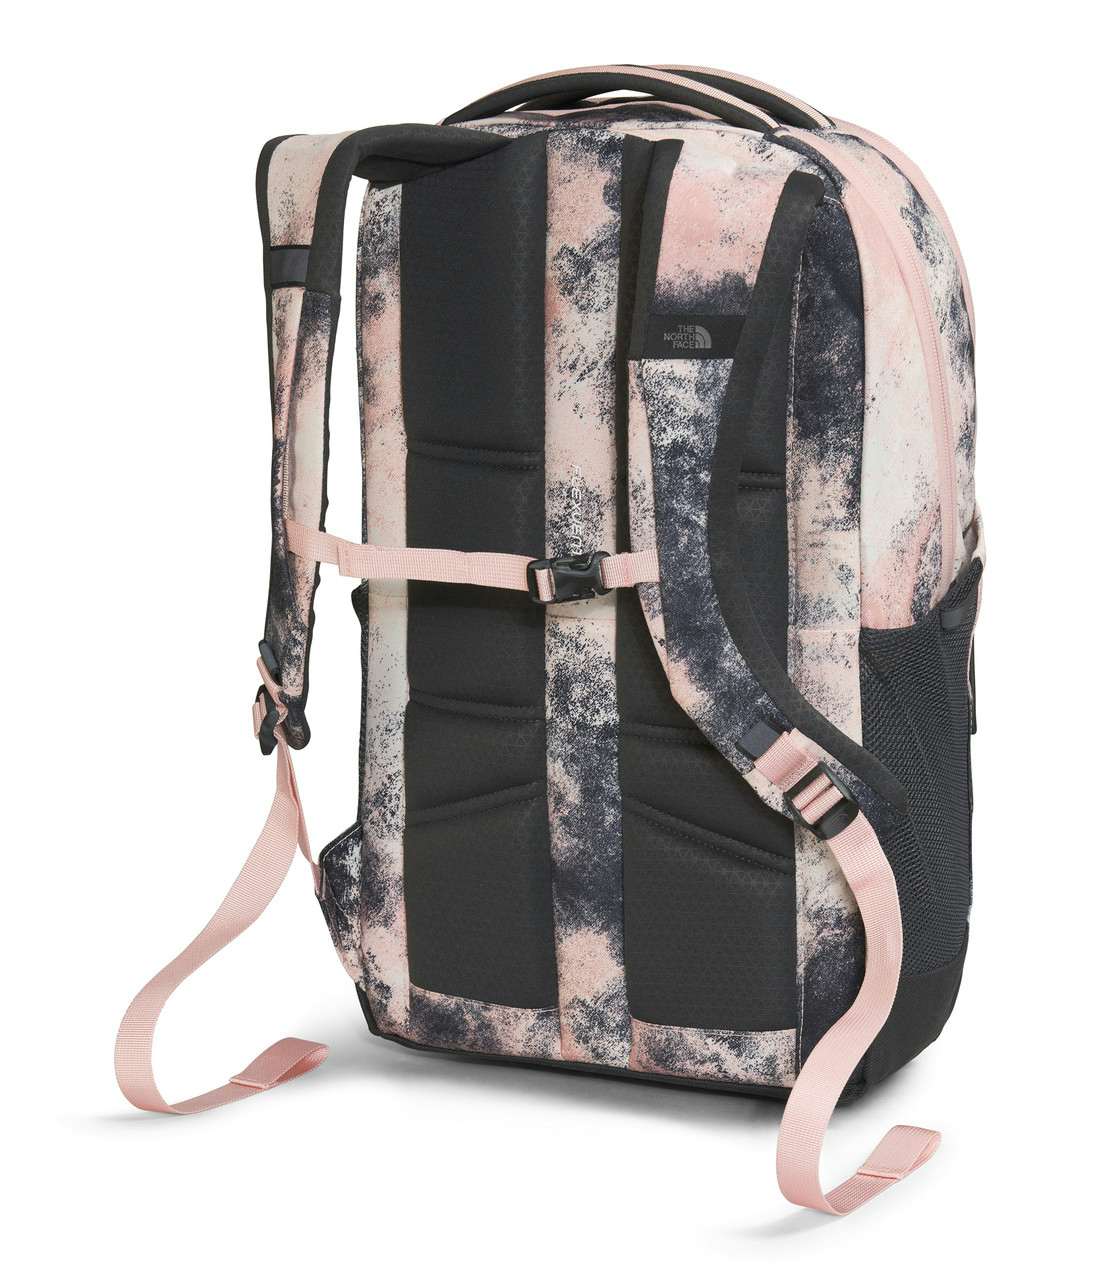 Jester 22 Daypack Pink Moss Faded Dye Camo 